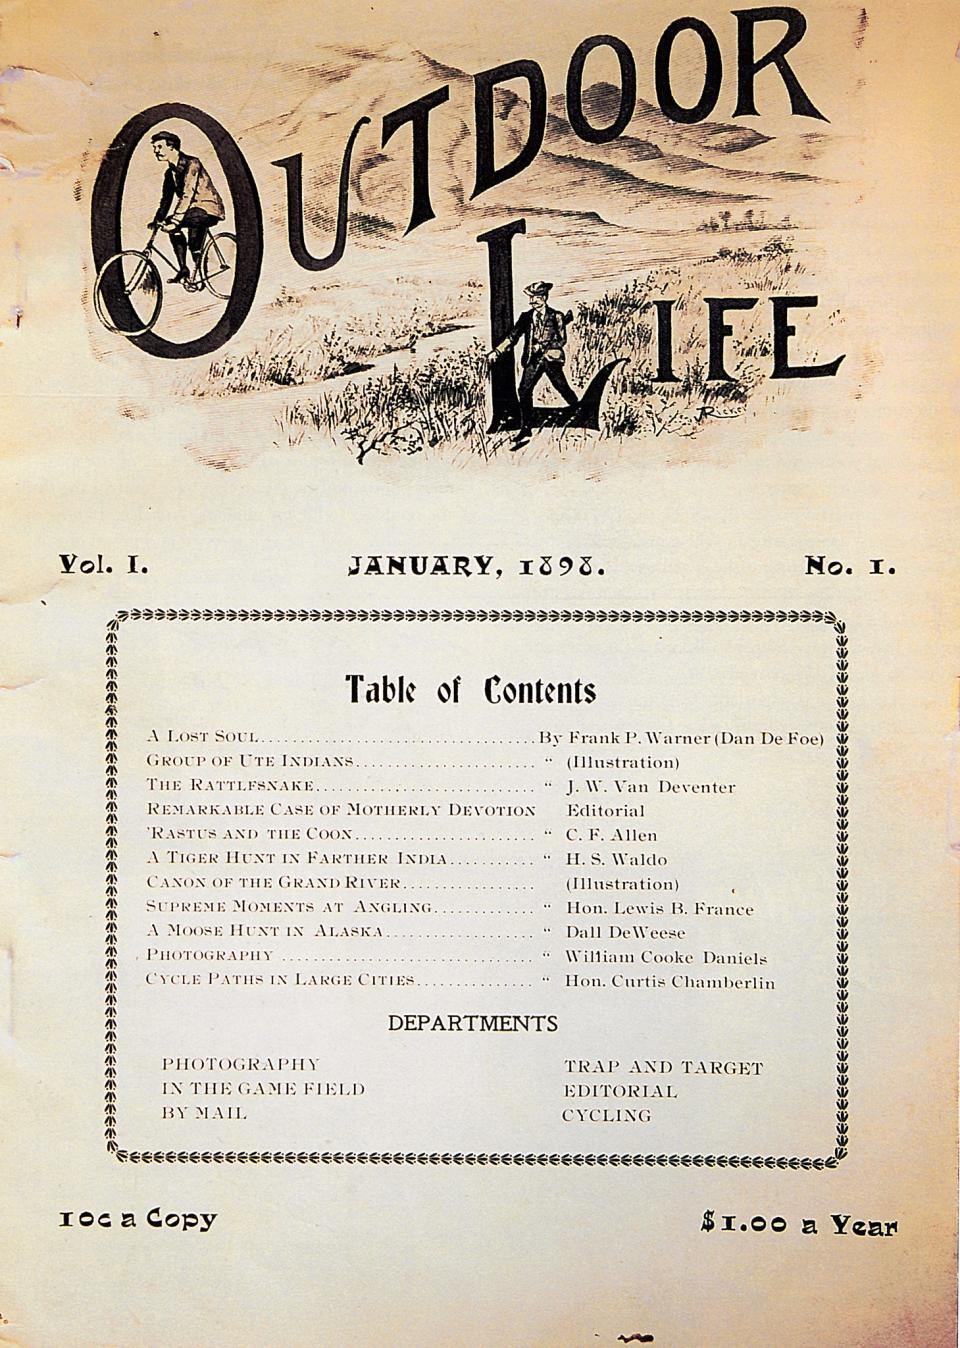 The inaugural cover of Outdoor Life, published 125 years ago in January 1898.